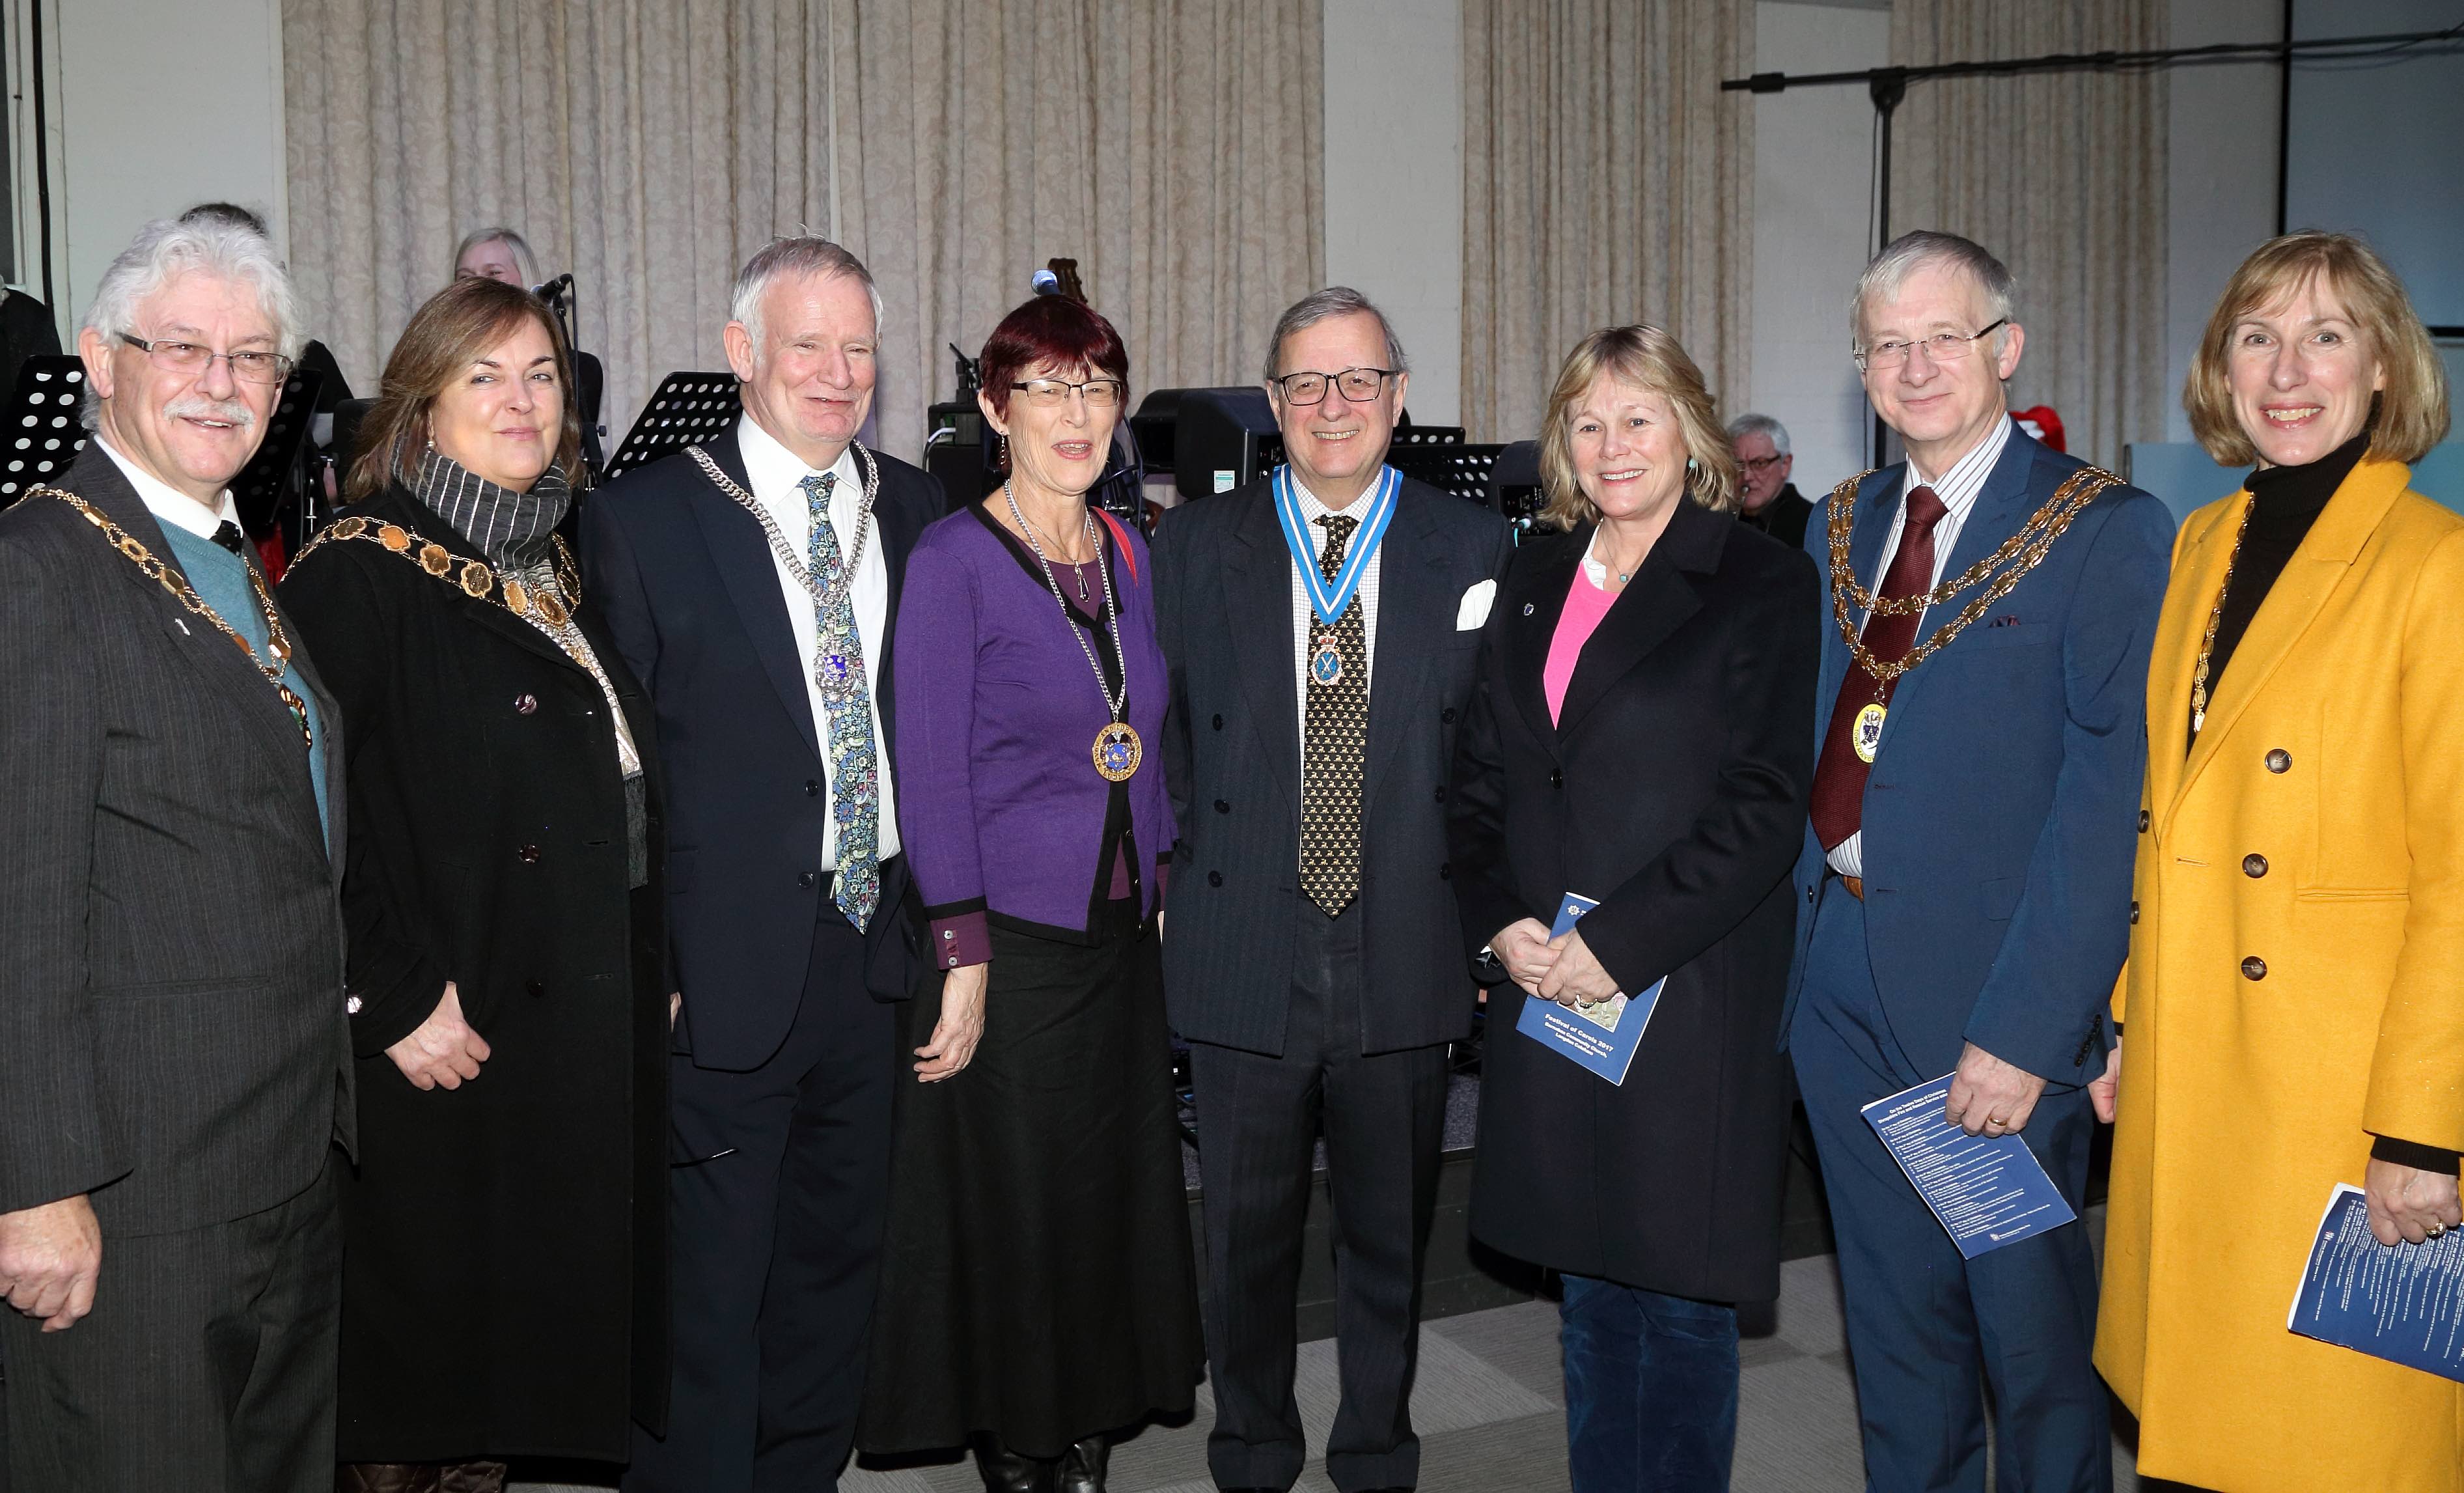 Dignitaries including the High Sheriff attended Shropshire Fire and Rescue Service's Festival of Carols